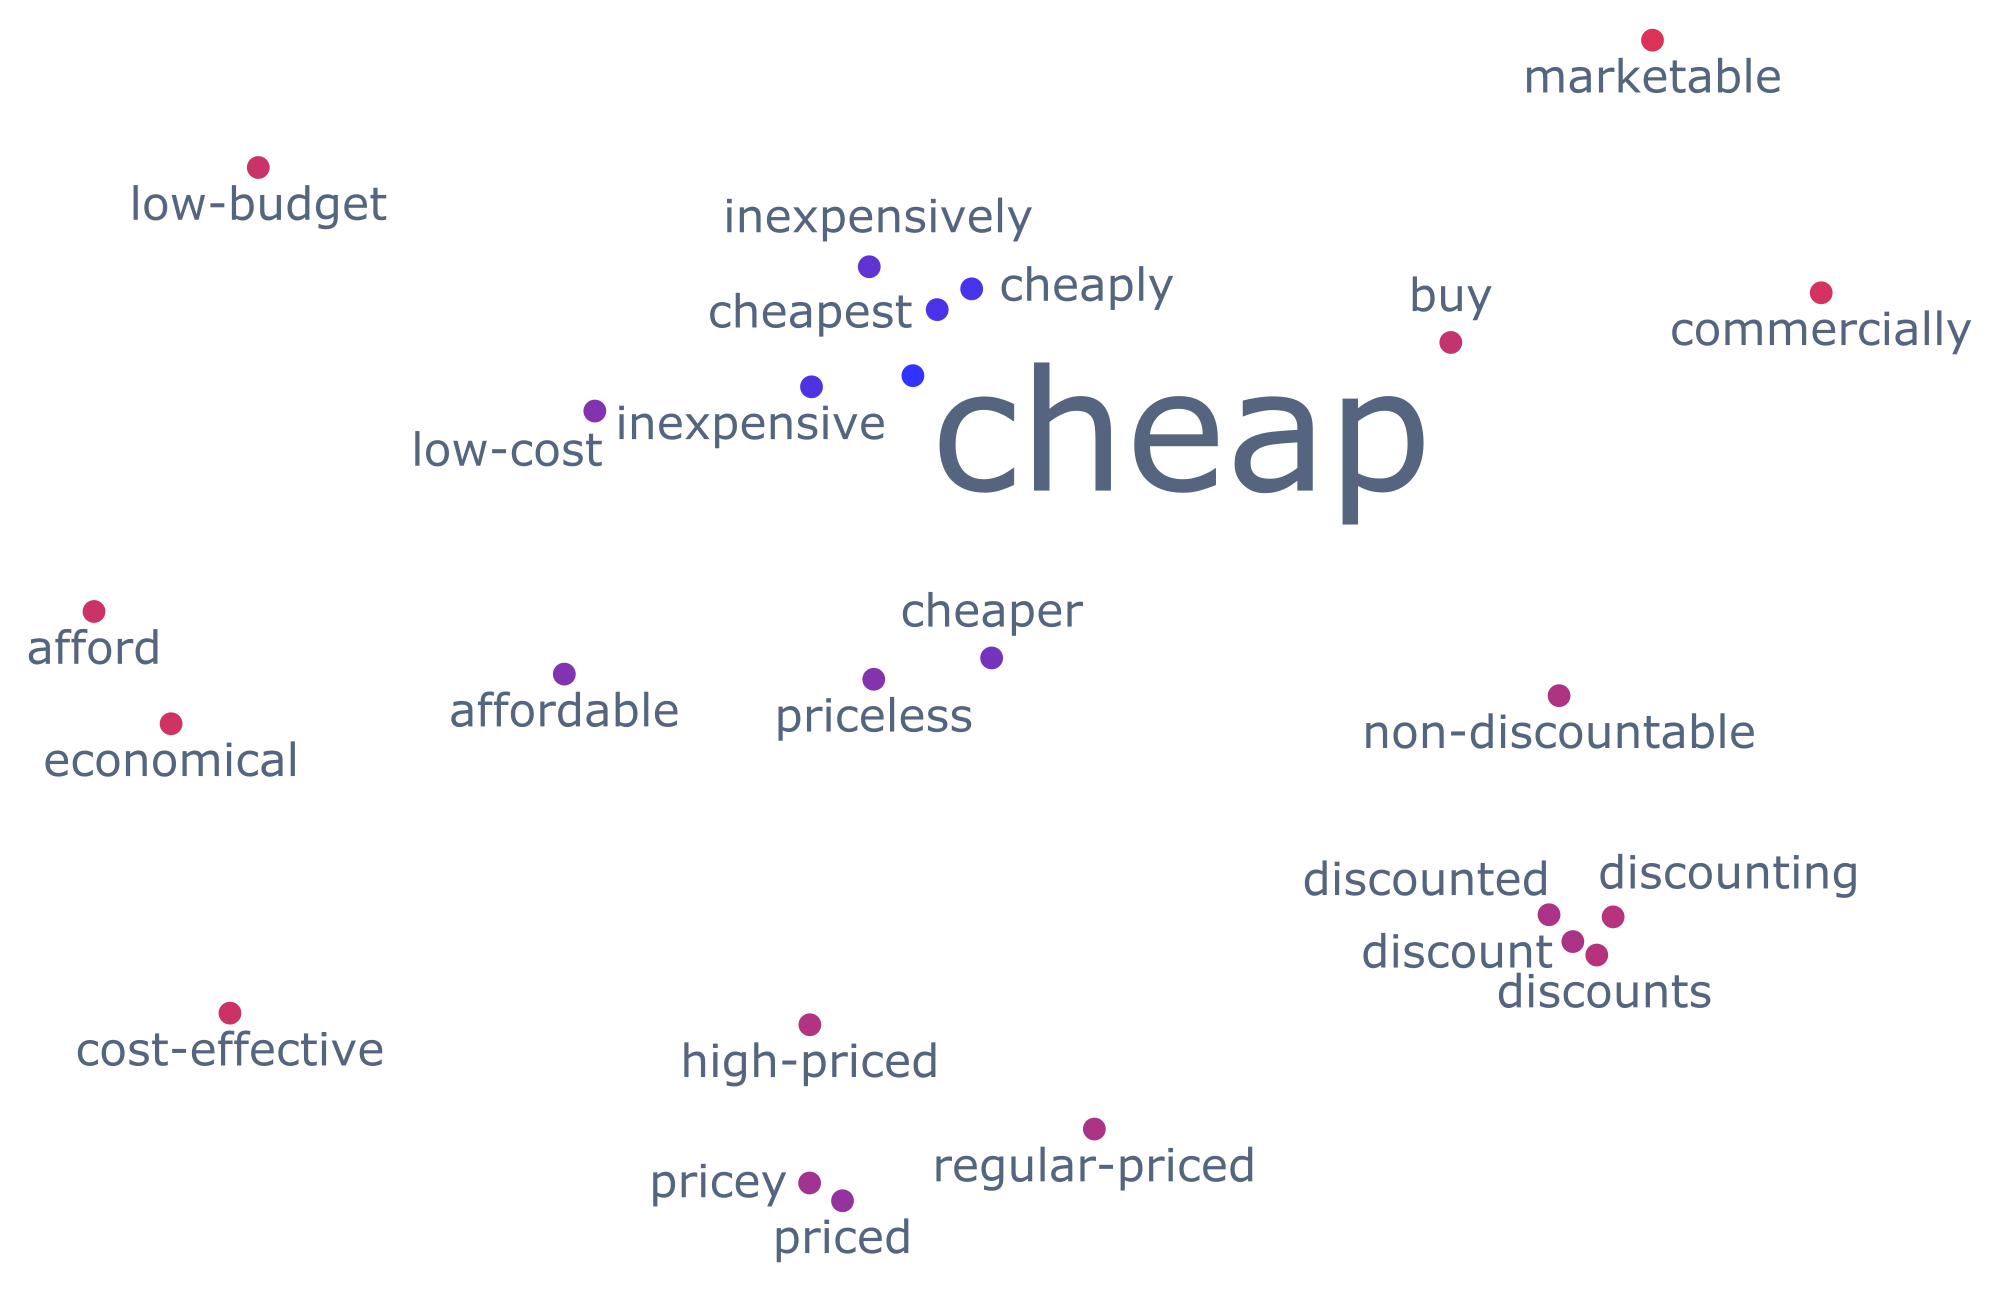 Close neighbors of the word cheap in a word embedding.